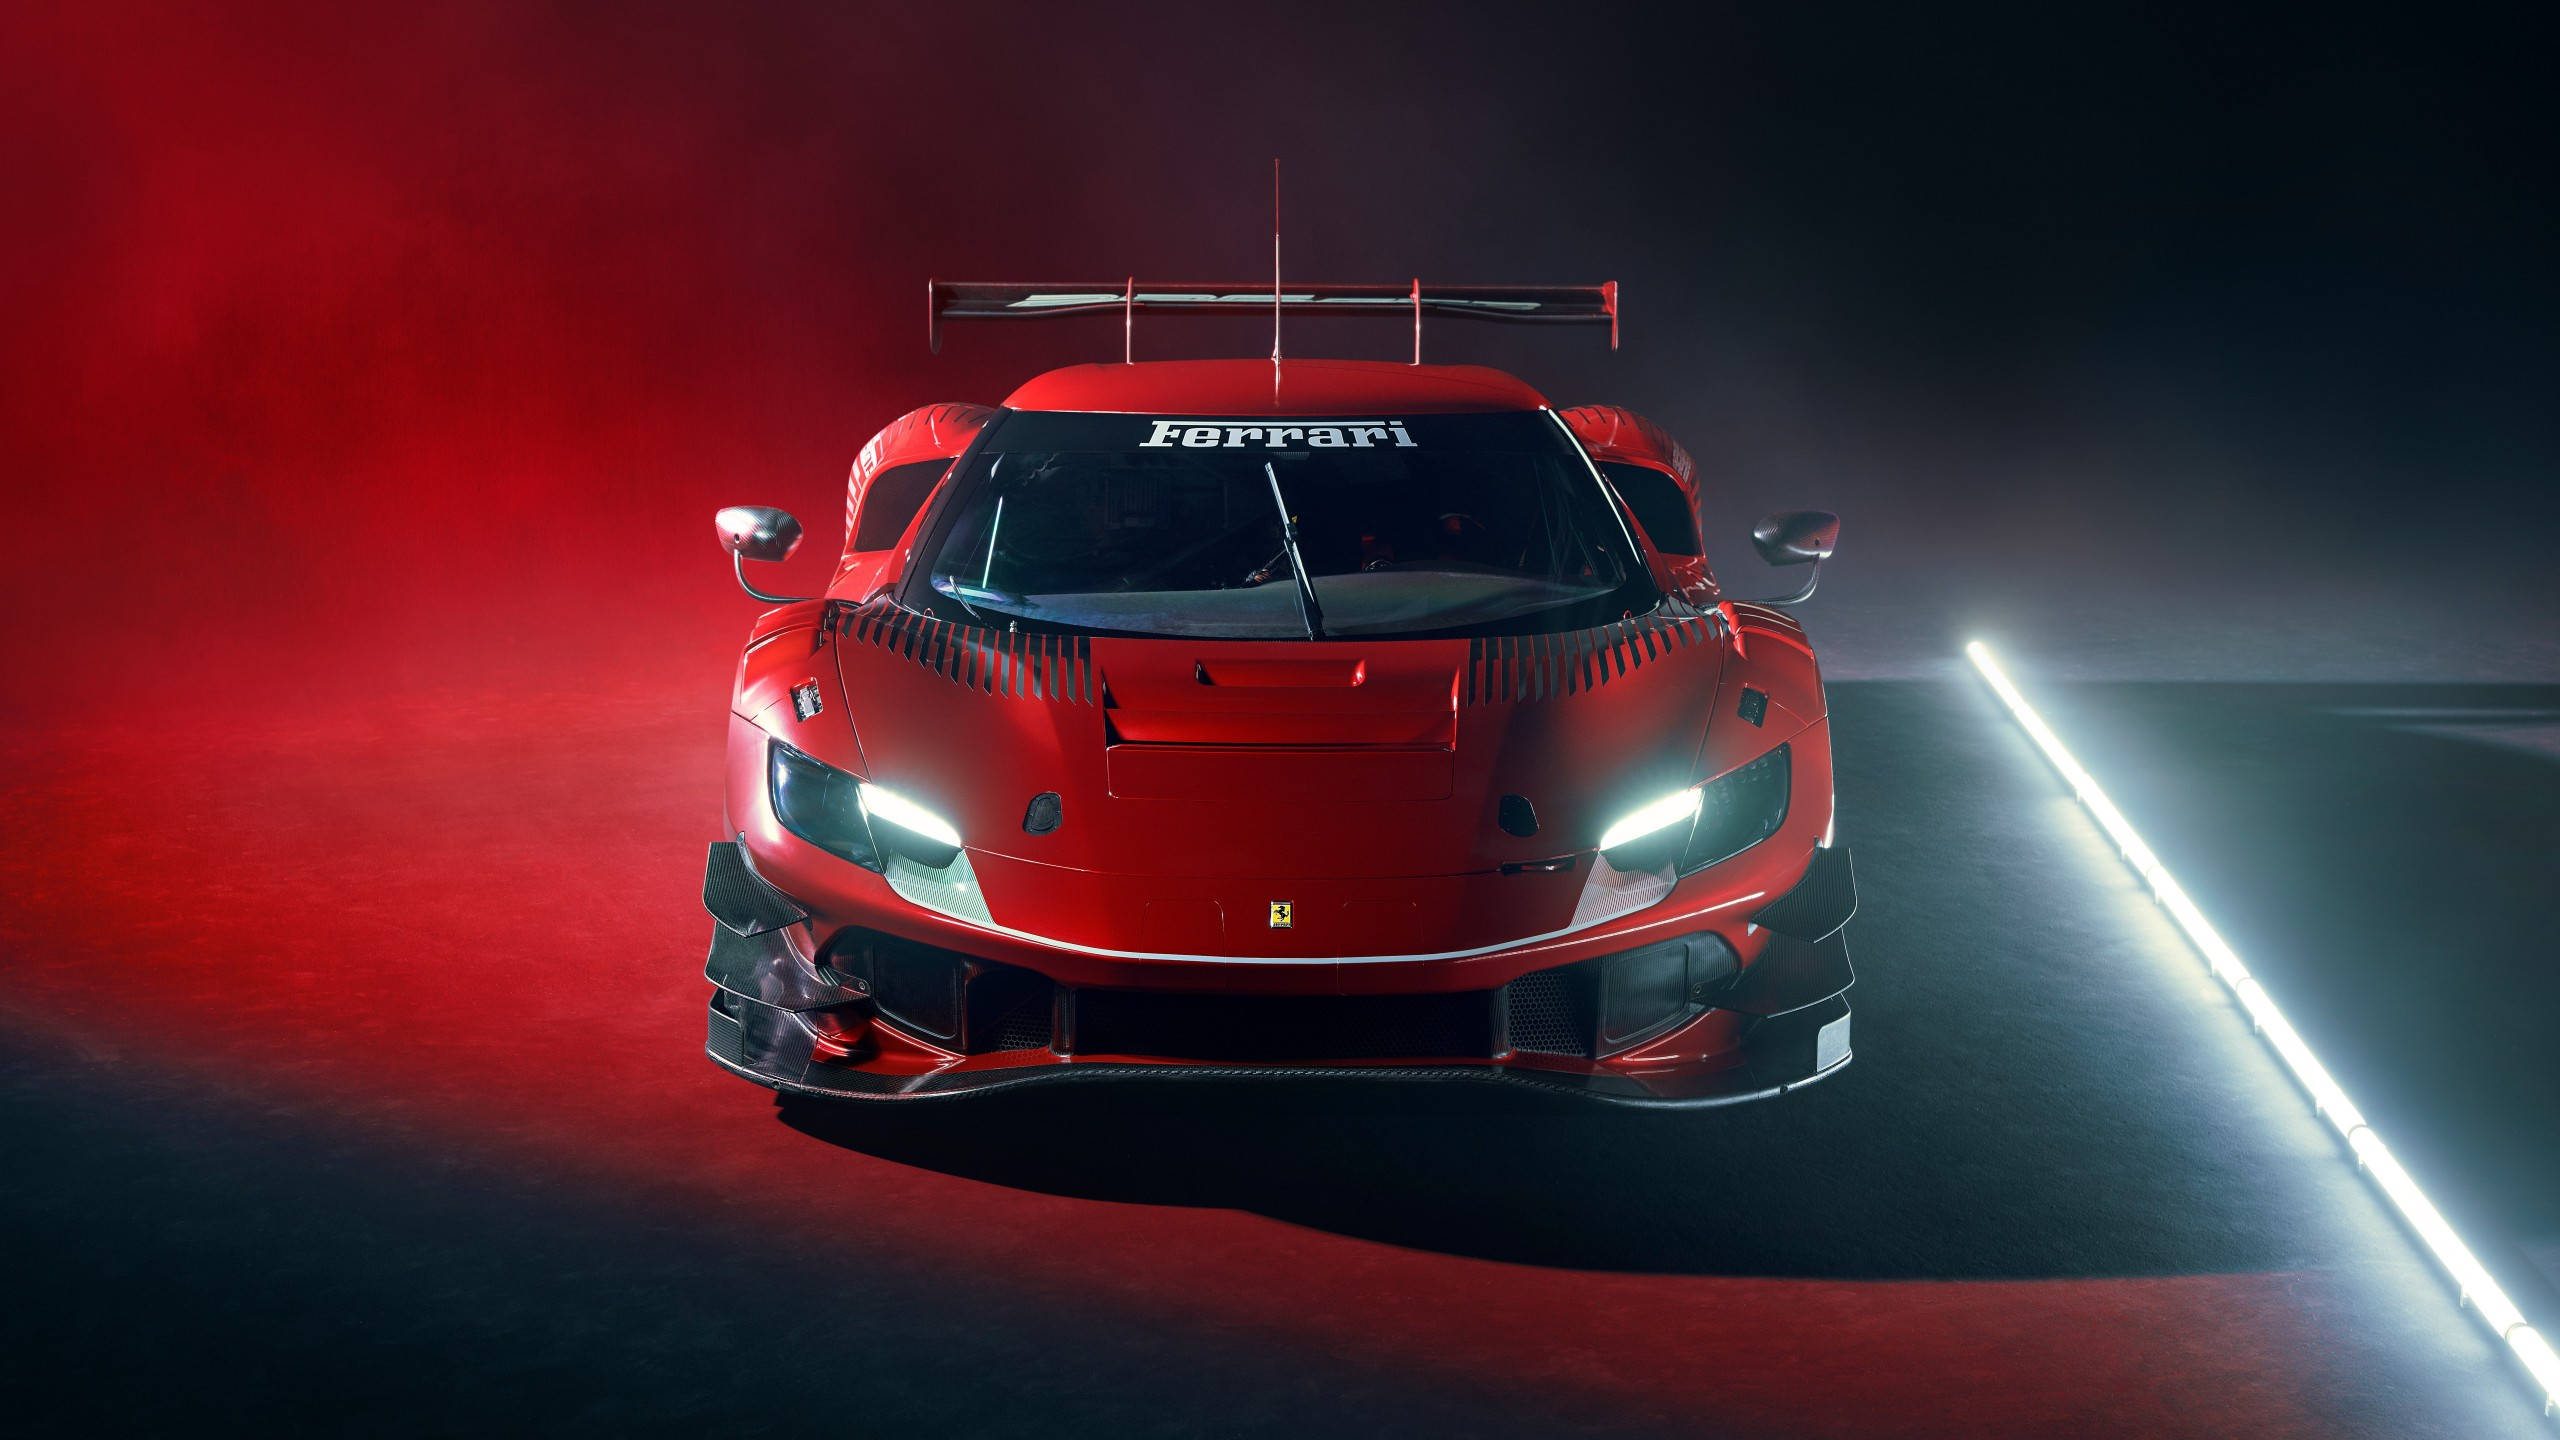 2560x1440 Car Red Mercedes-amg Project One Wallpaper